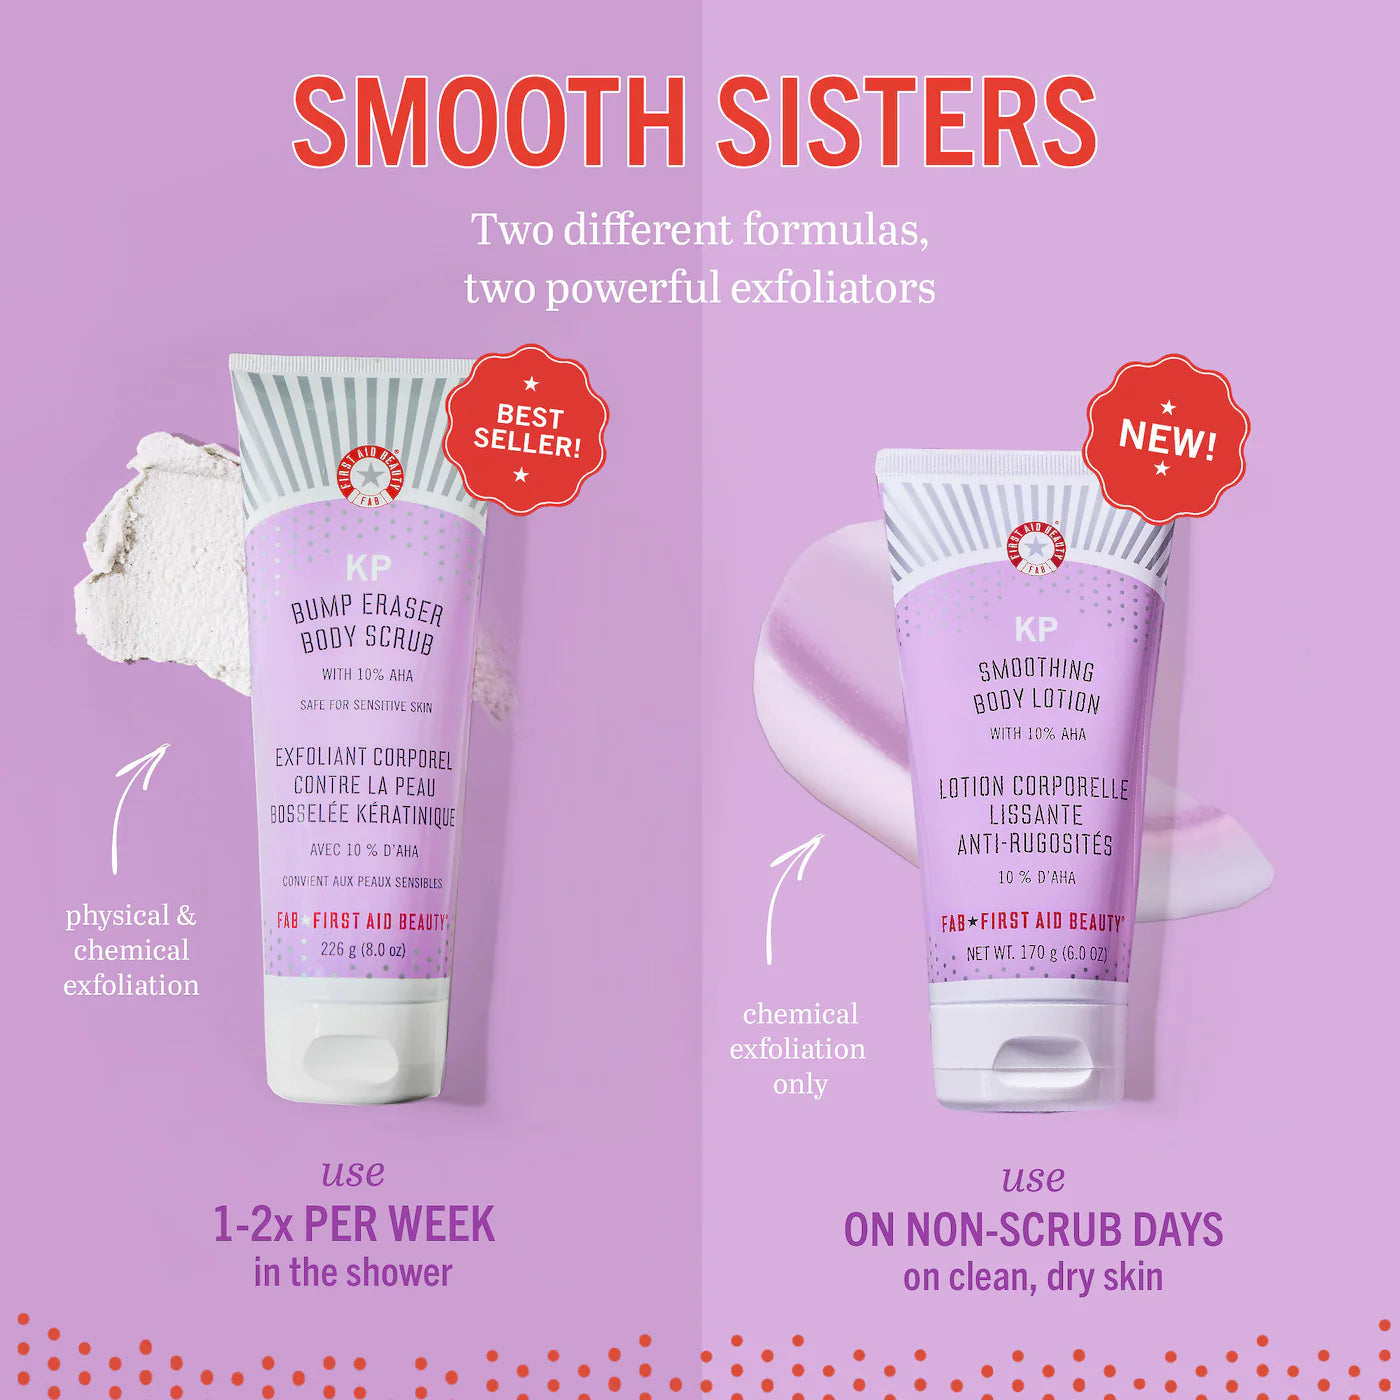 First Aid Beauty KP Smoothing Body Lotion with 10% AHA 6 oz